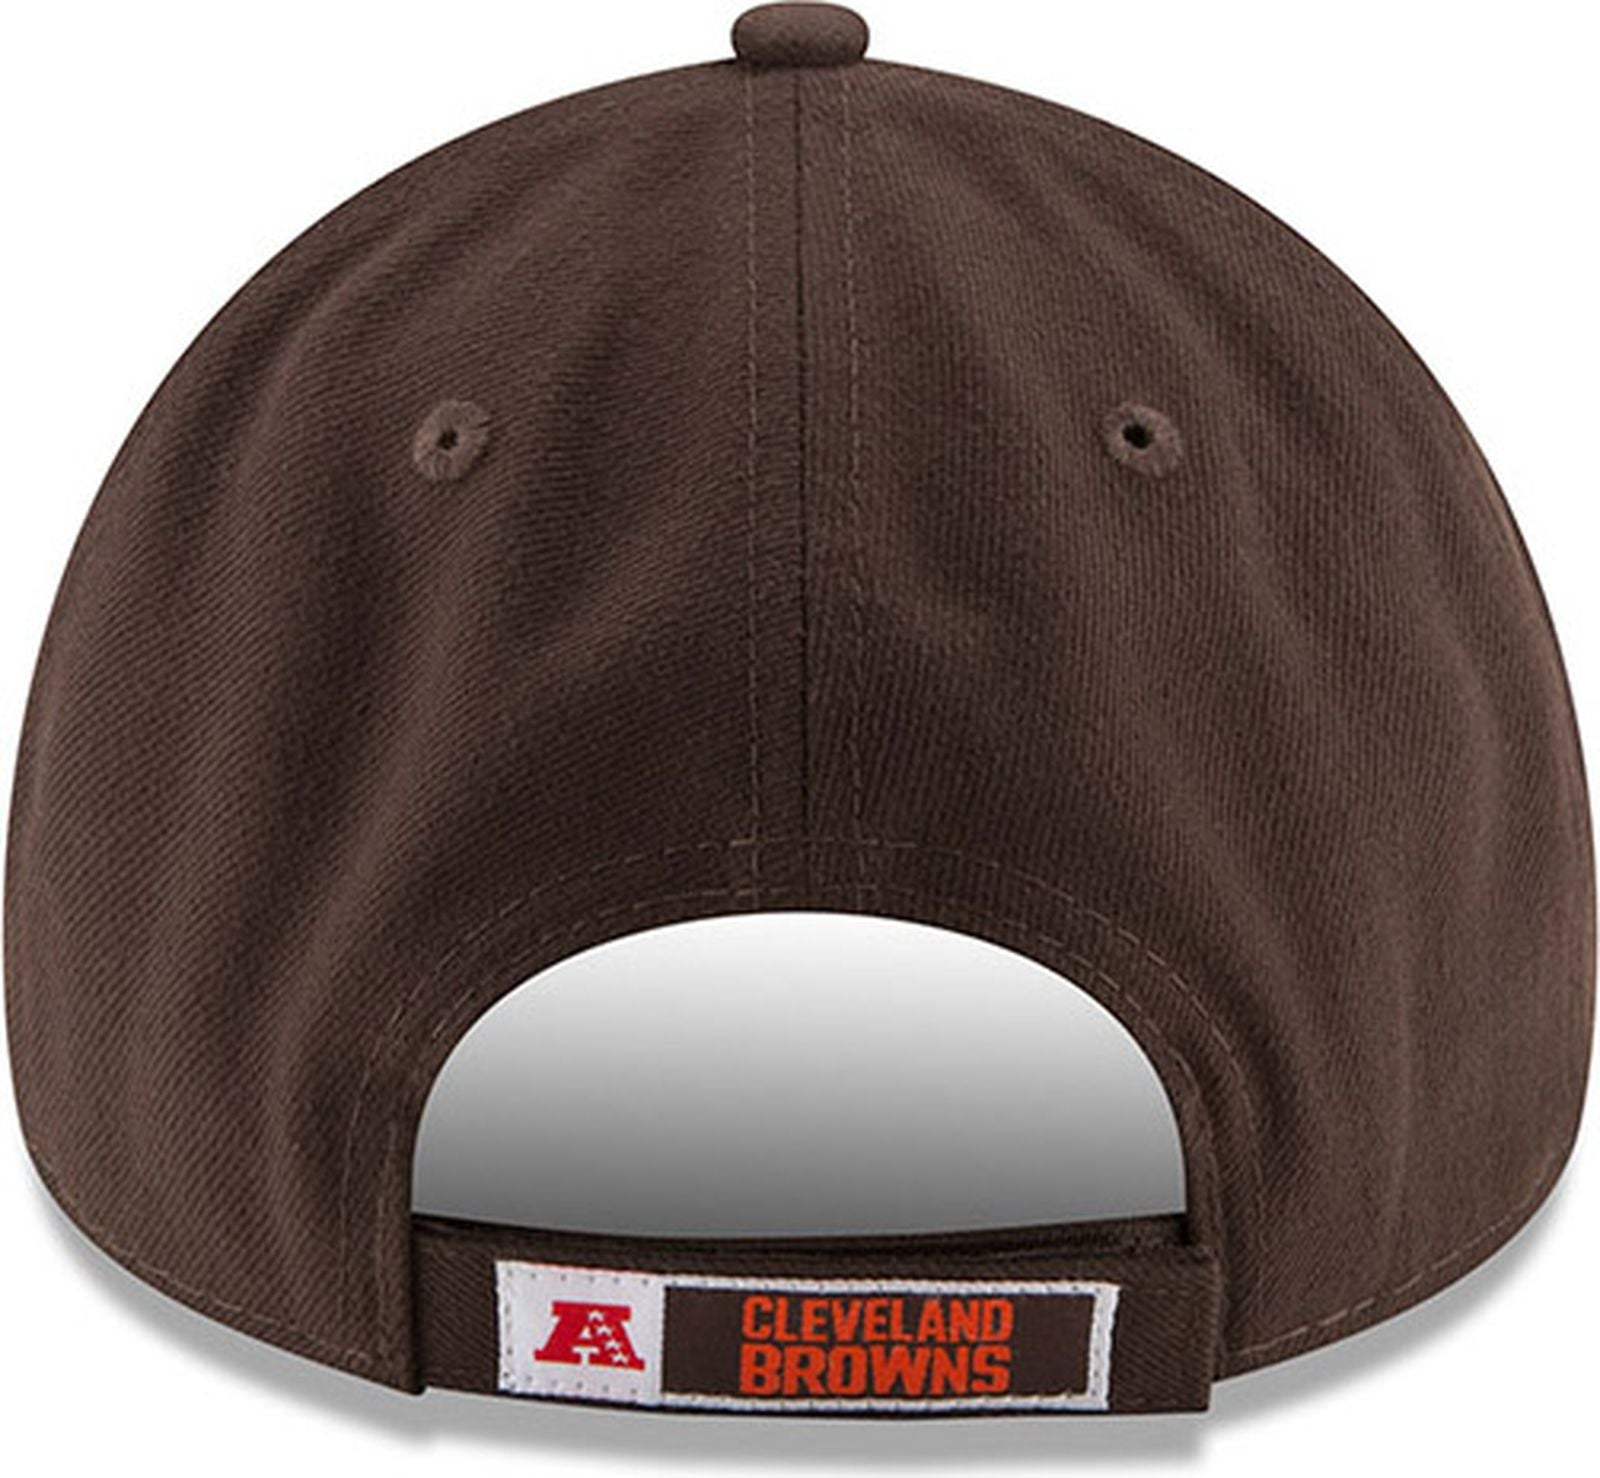 New Era - NFL Cleveland Browns The League 9Forty Cap - brown